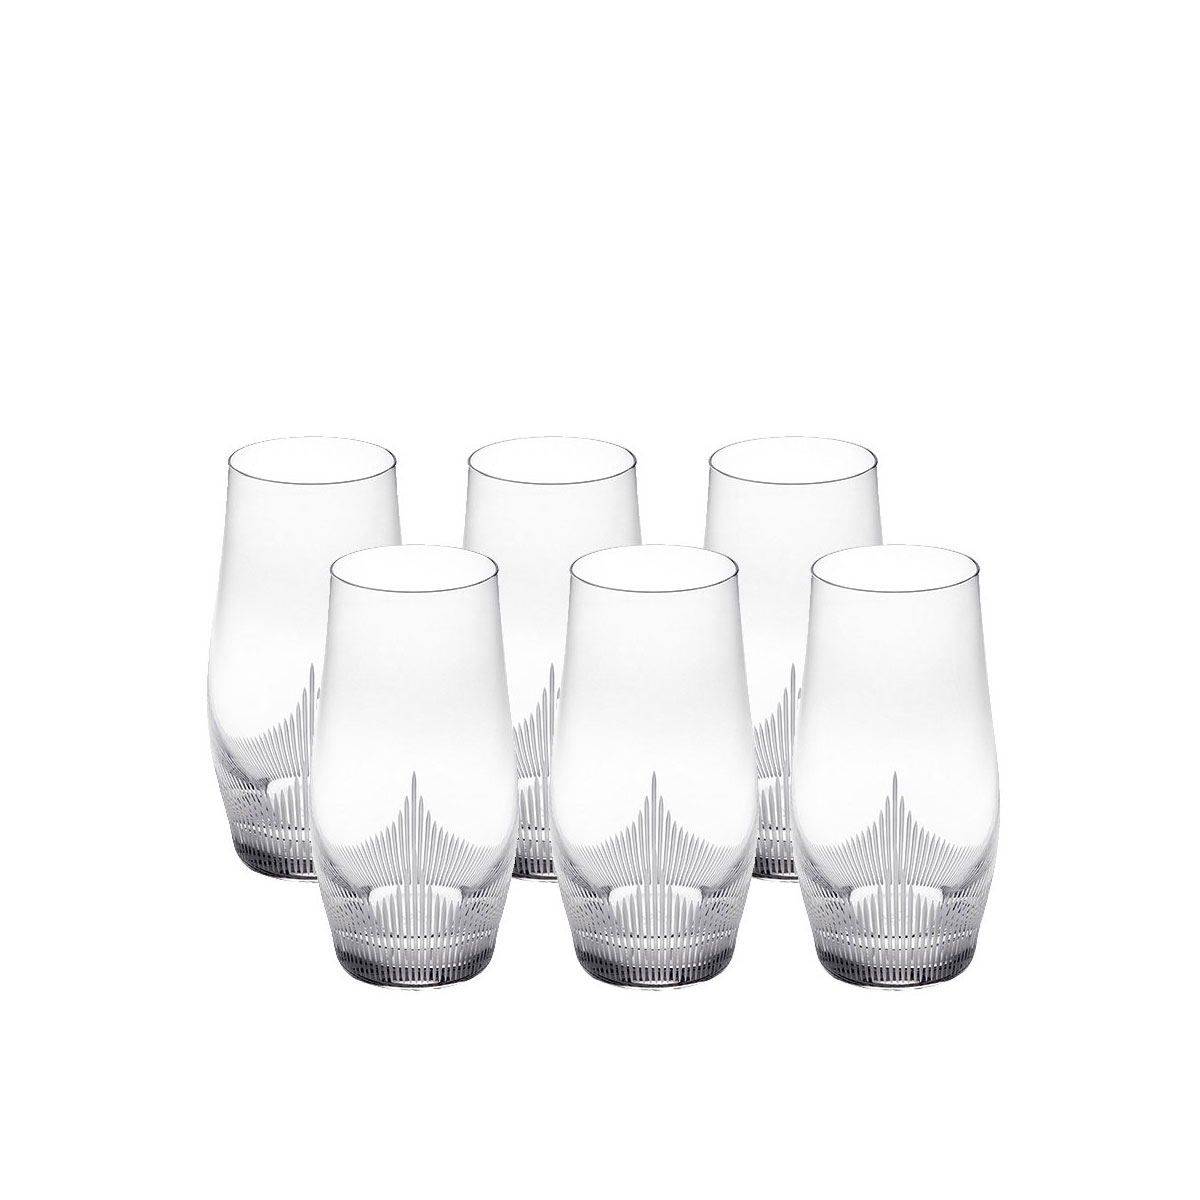 Lalique 100 Points Longdrink Tumblers By James Suckling, Set of Six